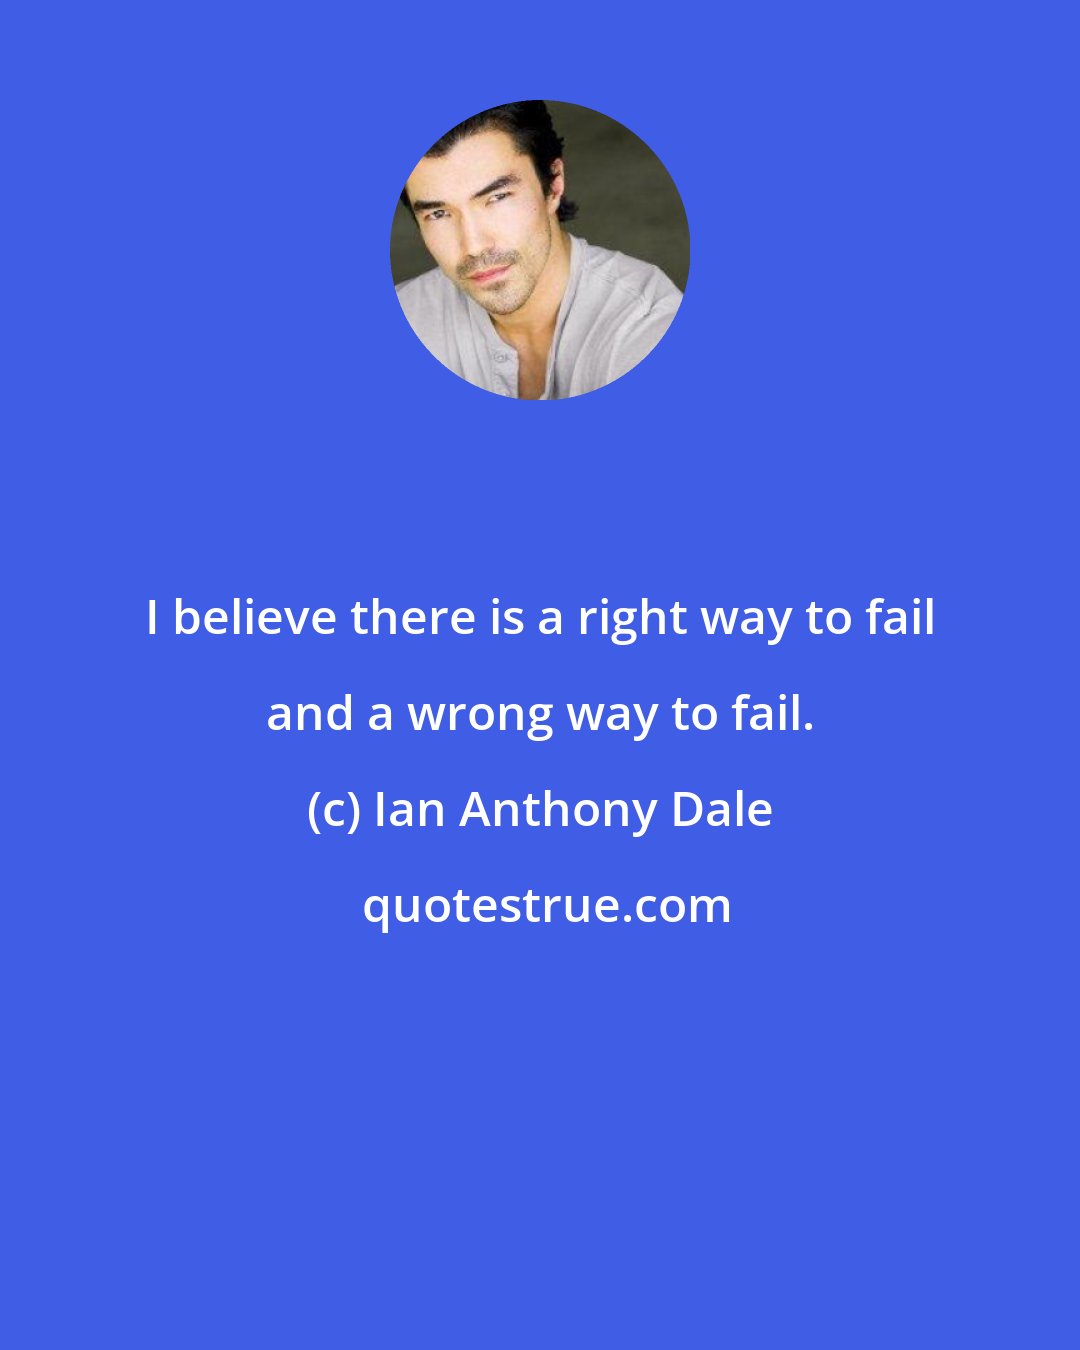 Ian Anthony Dale: I believe there is a right way to fail and a wrong way to fail.